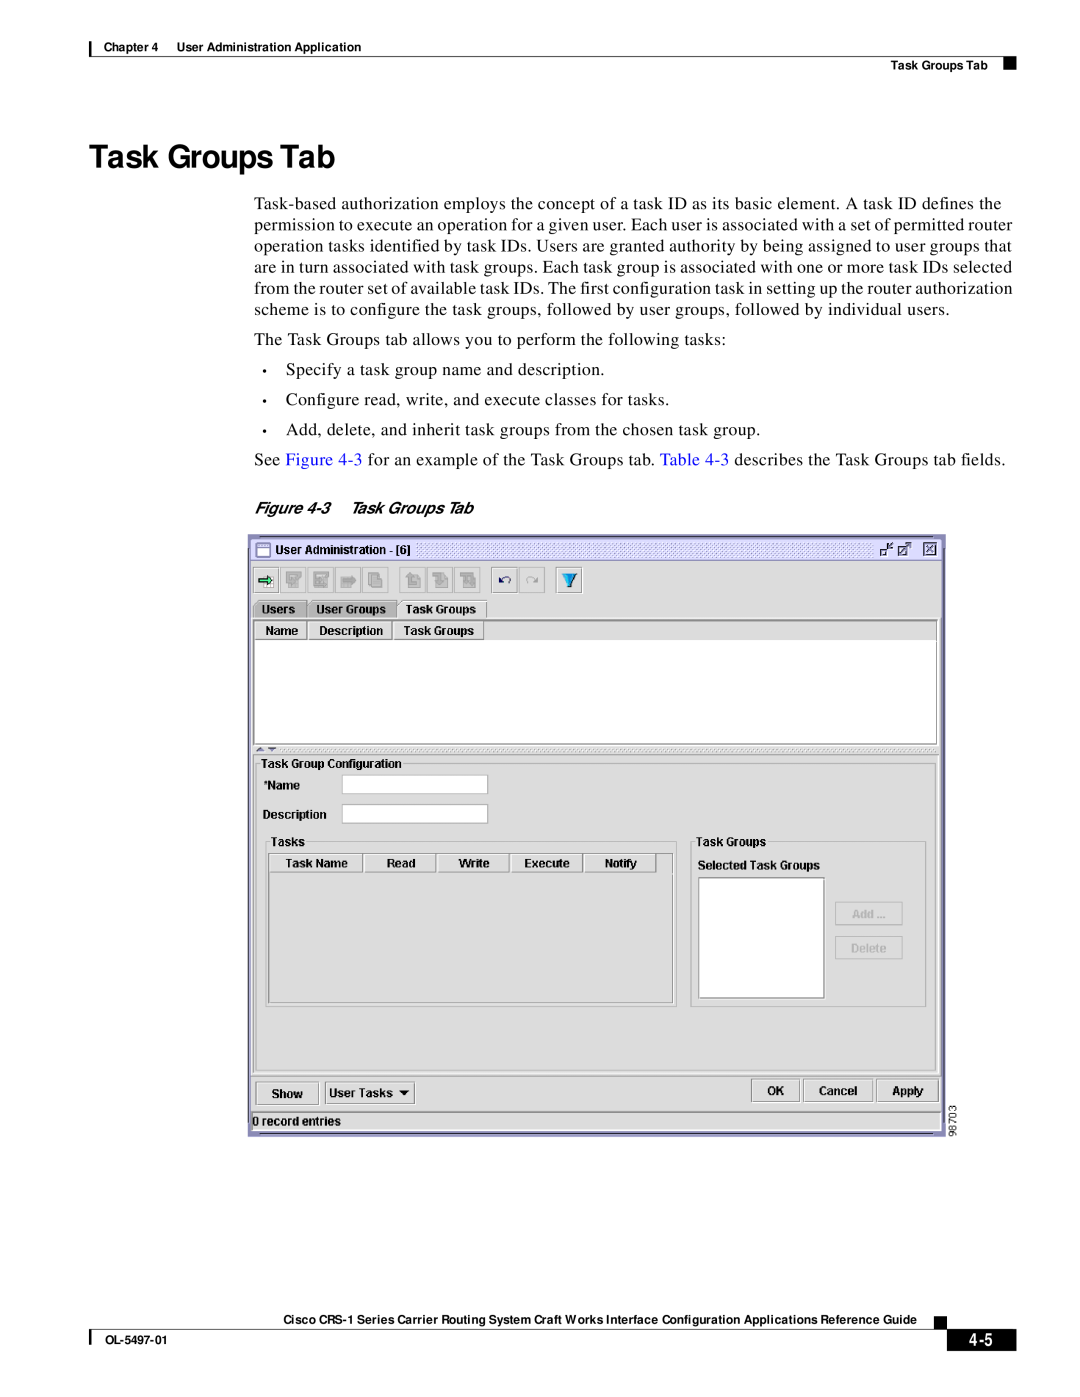 Cisco Systems CRS-1 Series manual Task Groups Tab 